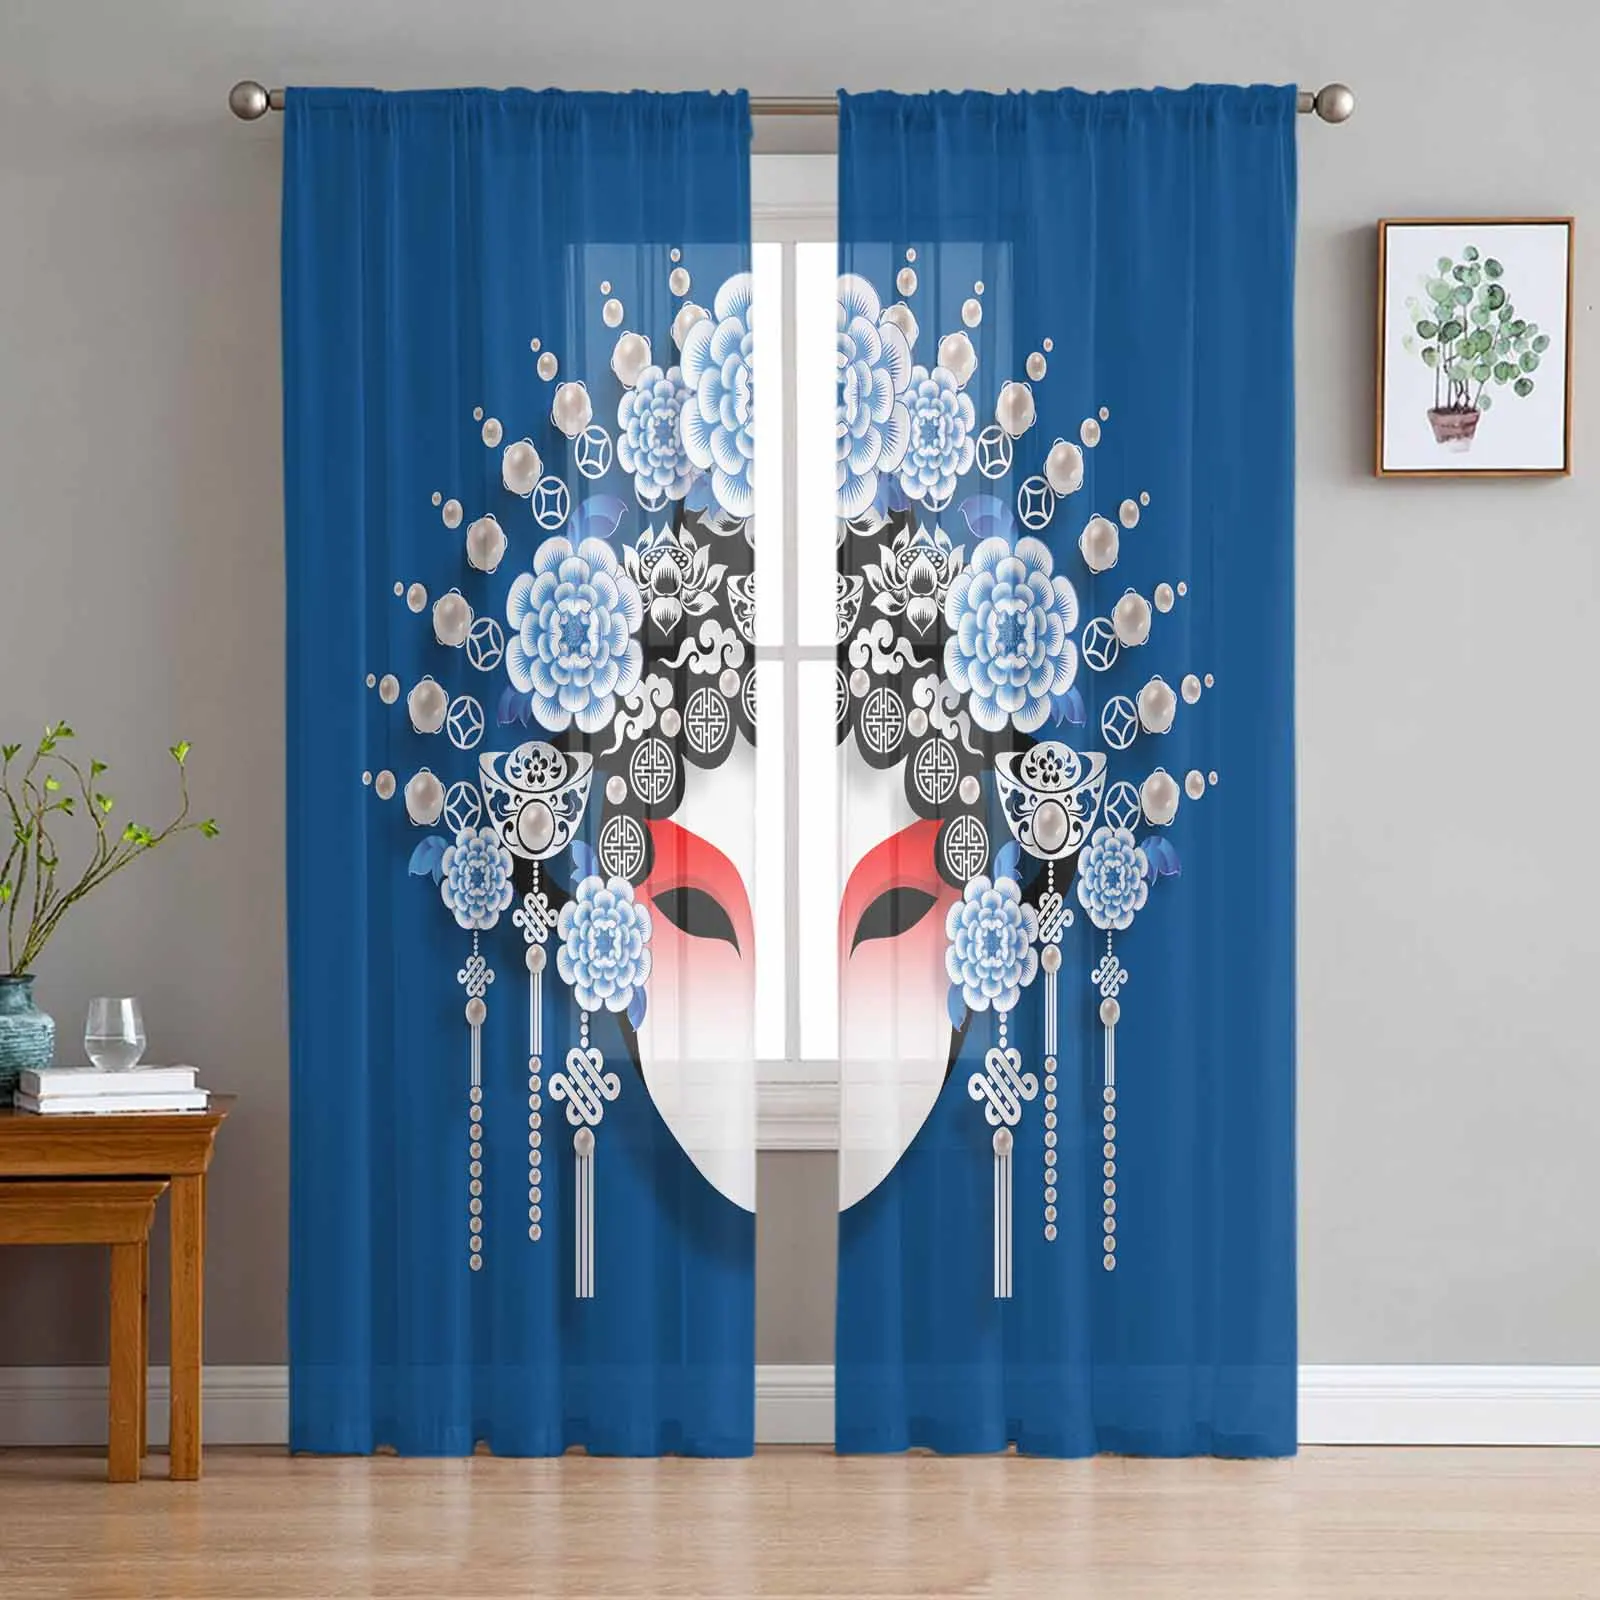 

Blue Traditional Chinese Opera Voile Sheer Curtains Living Room Window Tulle Curtain Kitchen Bedroom Drapes Home Decor